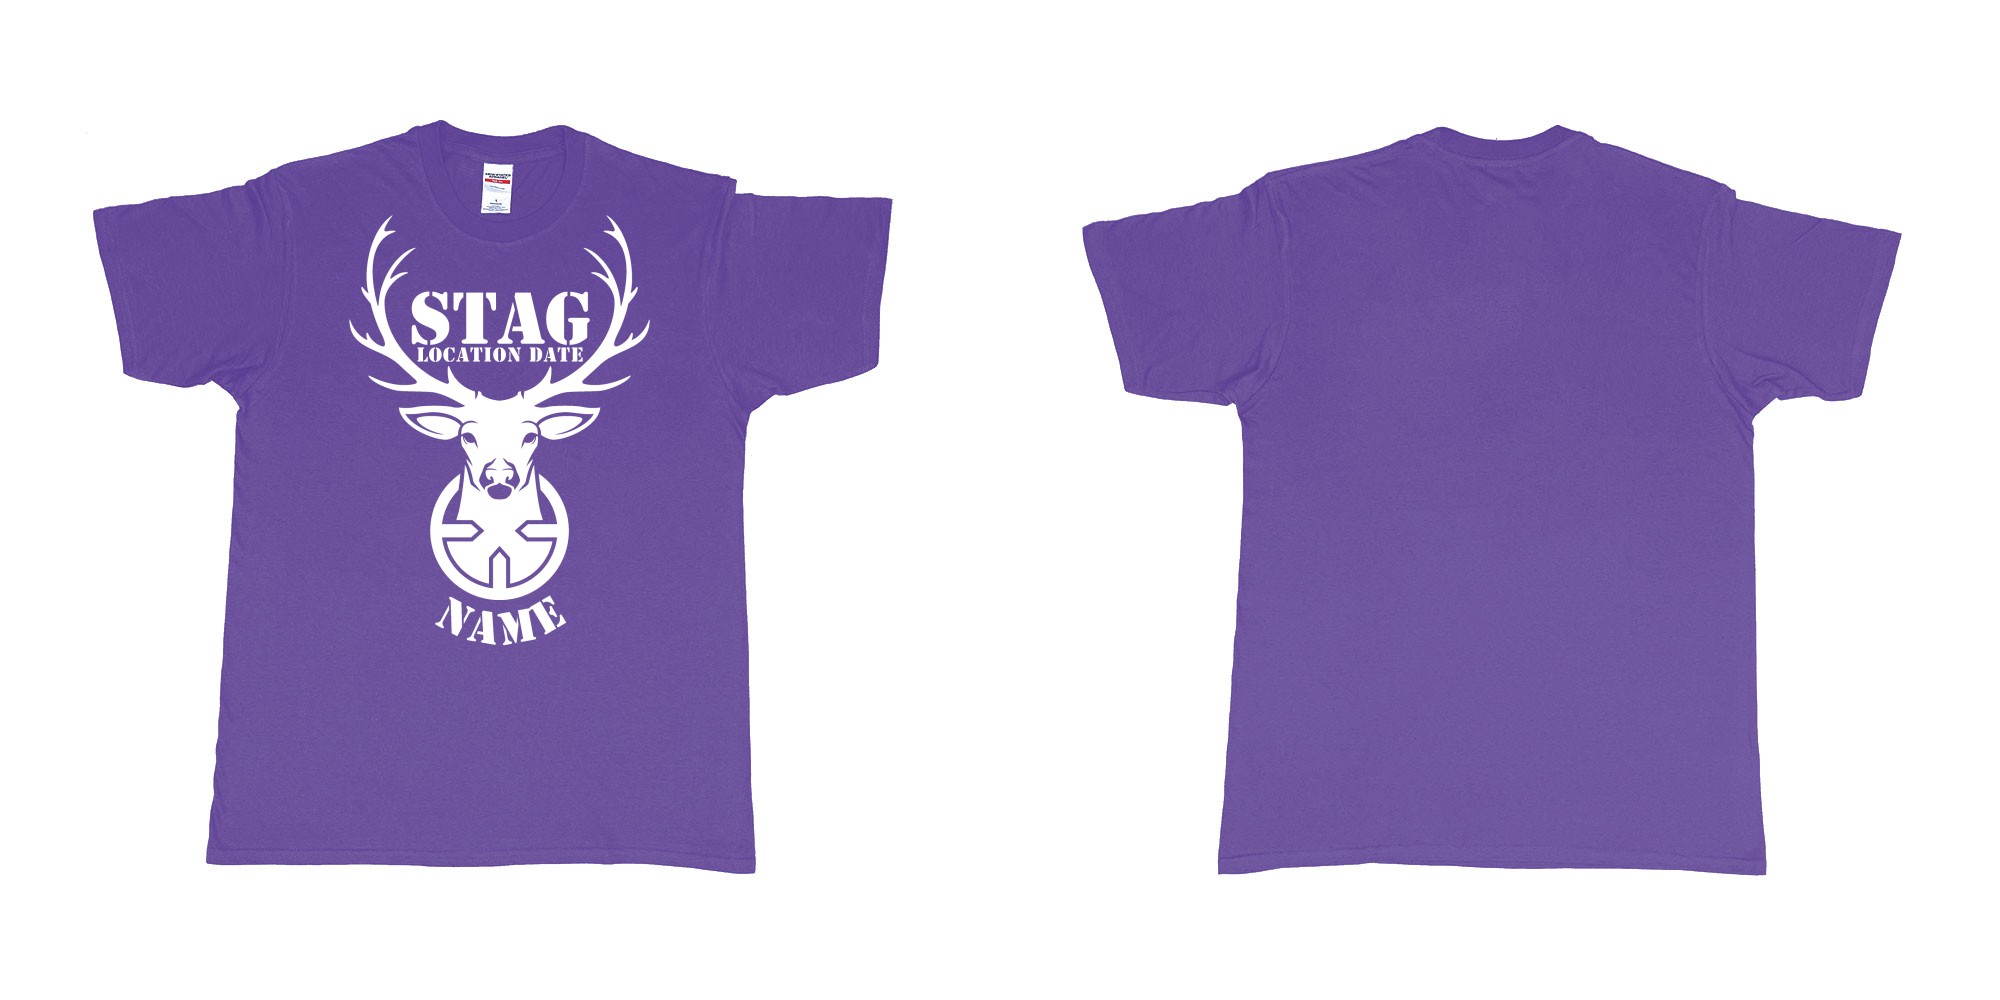 Custom tshirt design aiming for a stag custom tshirt print in fabric color purple choice your own text made in Bali by The Pirate Way